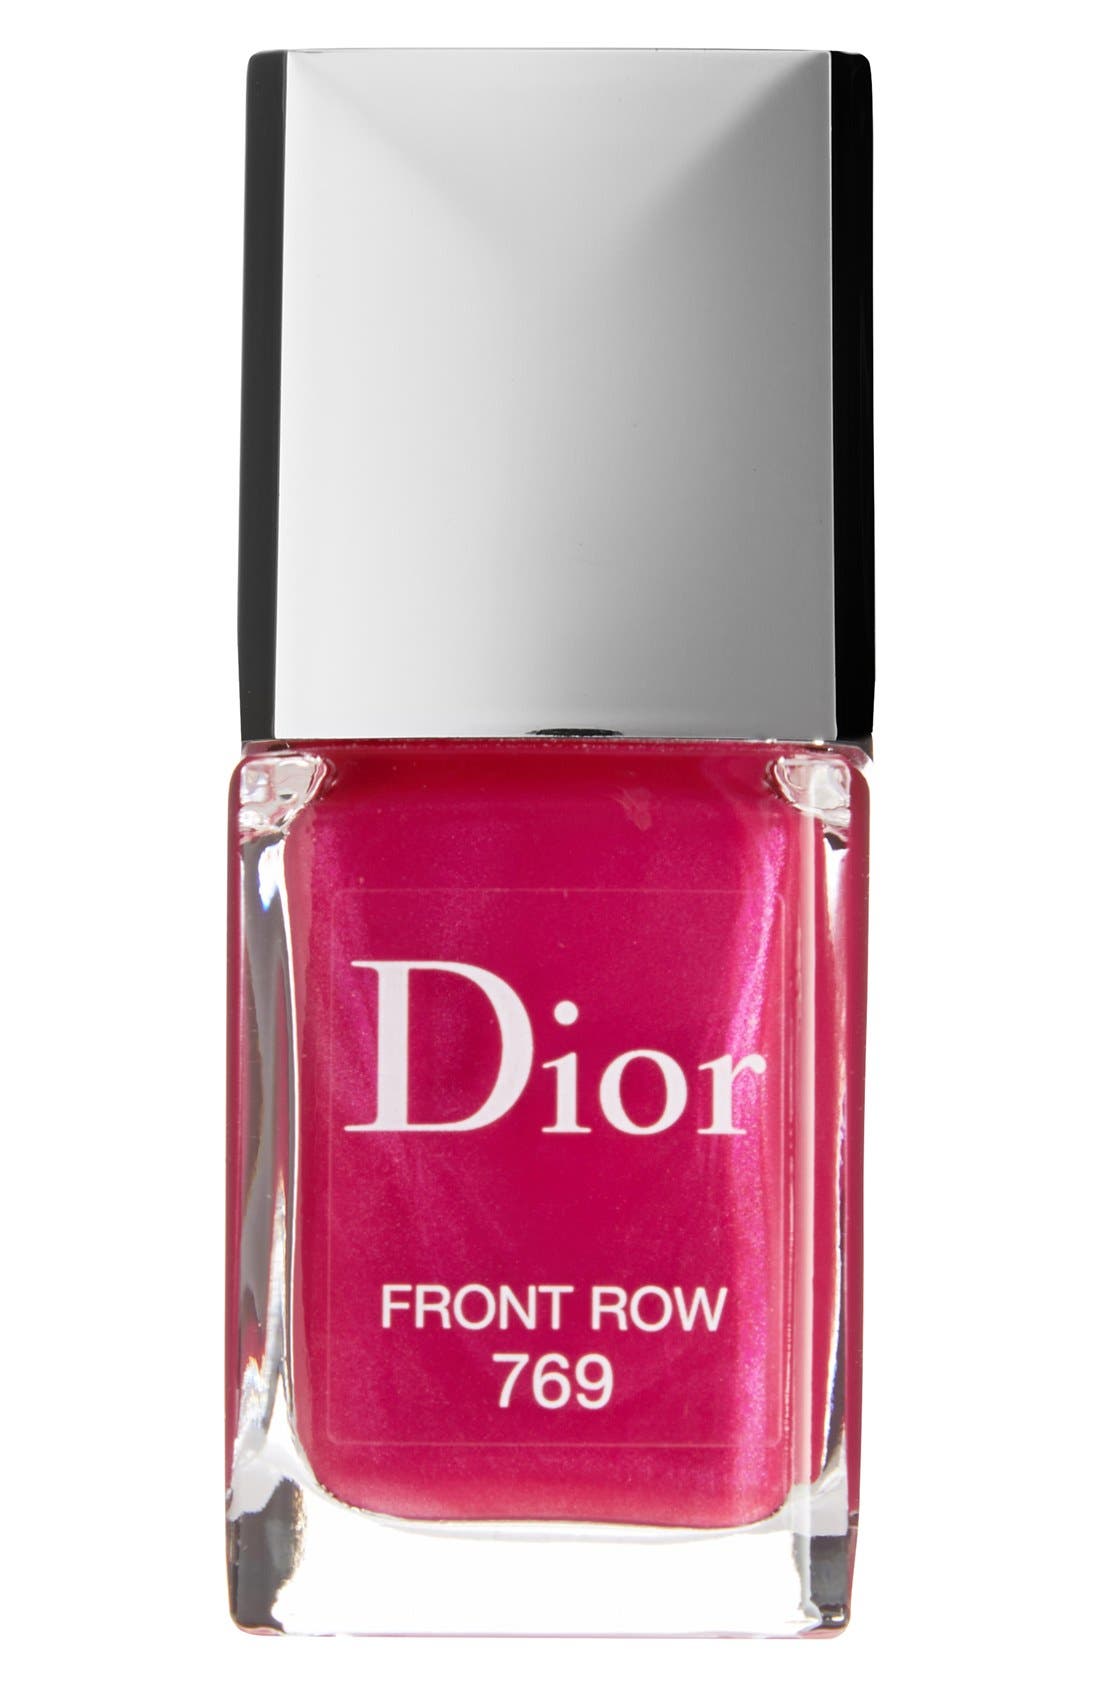 EAN 3348901208048 product image for Dior Vernis Gel Shine & Long Wear Nail Lacquer - 769 Front Row | upcitemdb.com